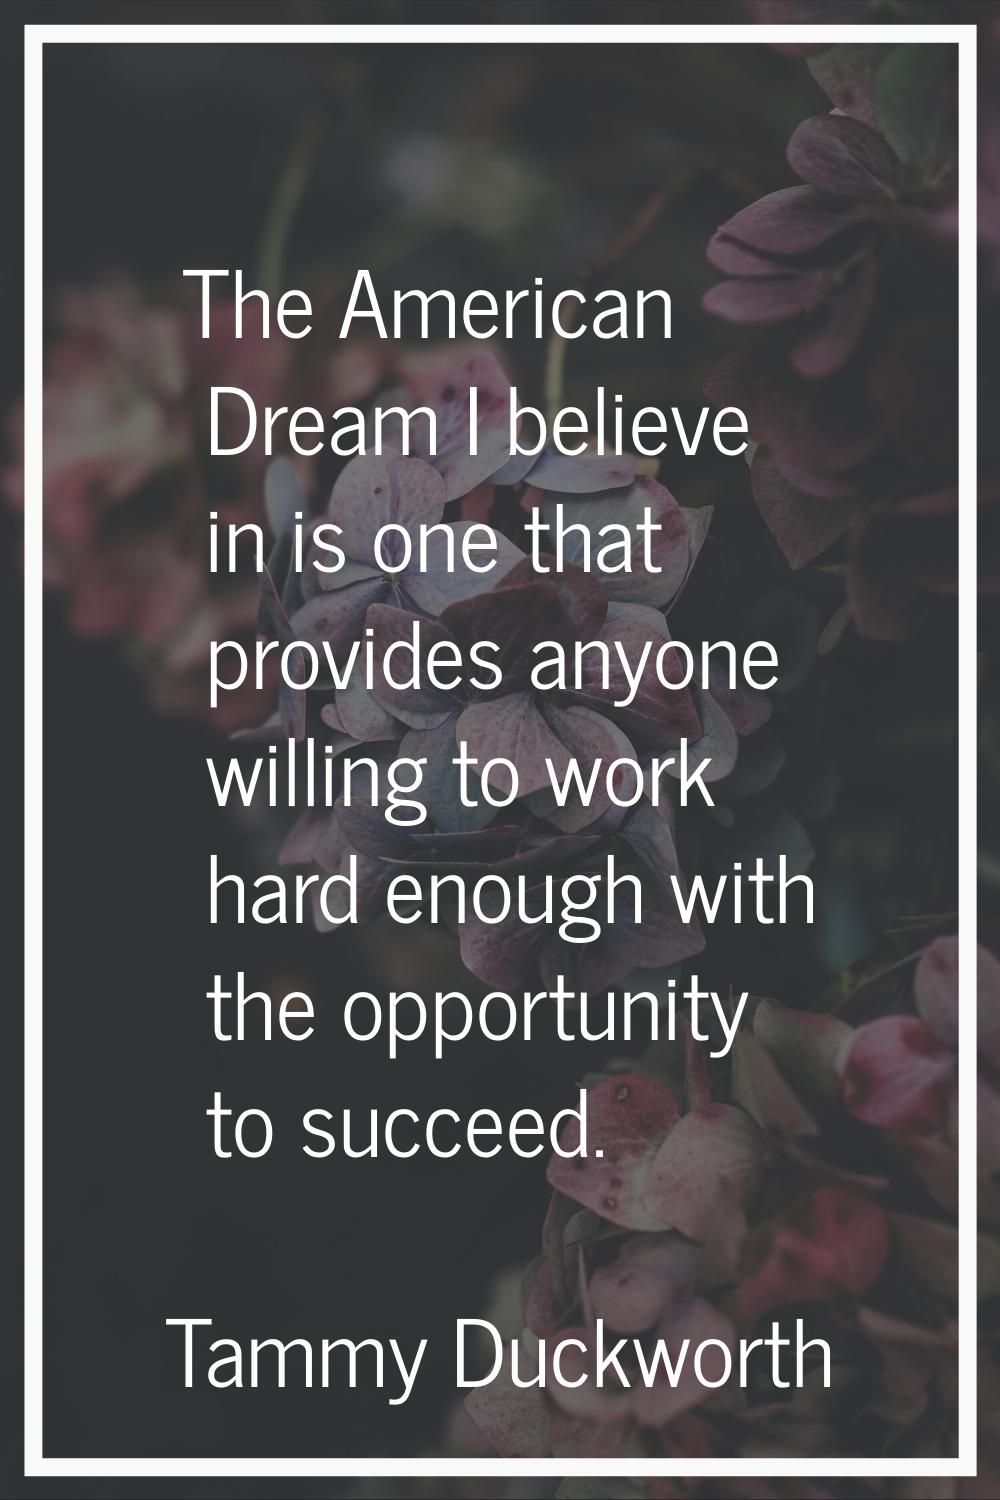 The American Dream I believe in is one that provides anyone willing to work hard enough with the op